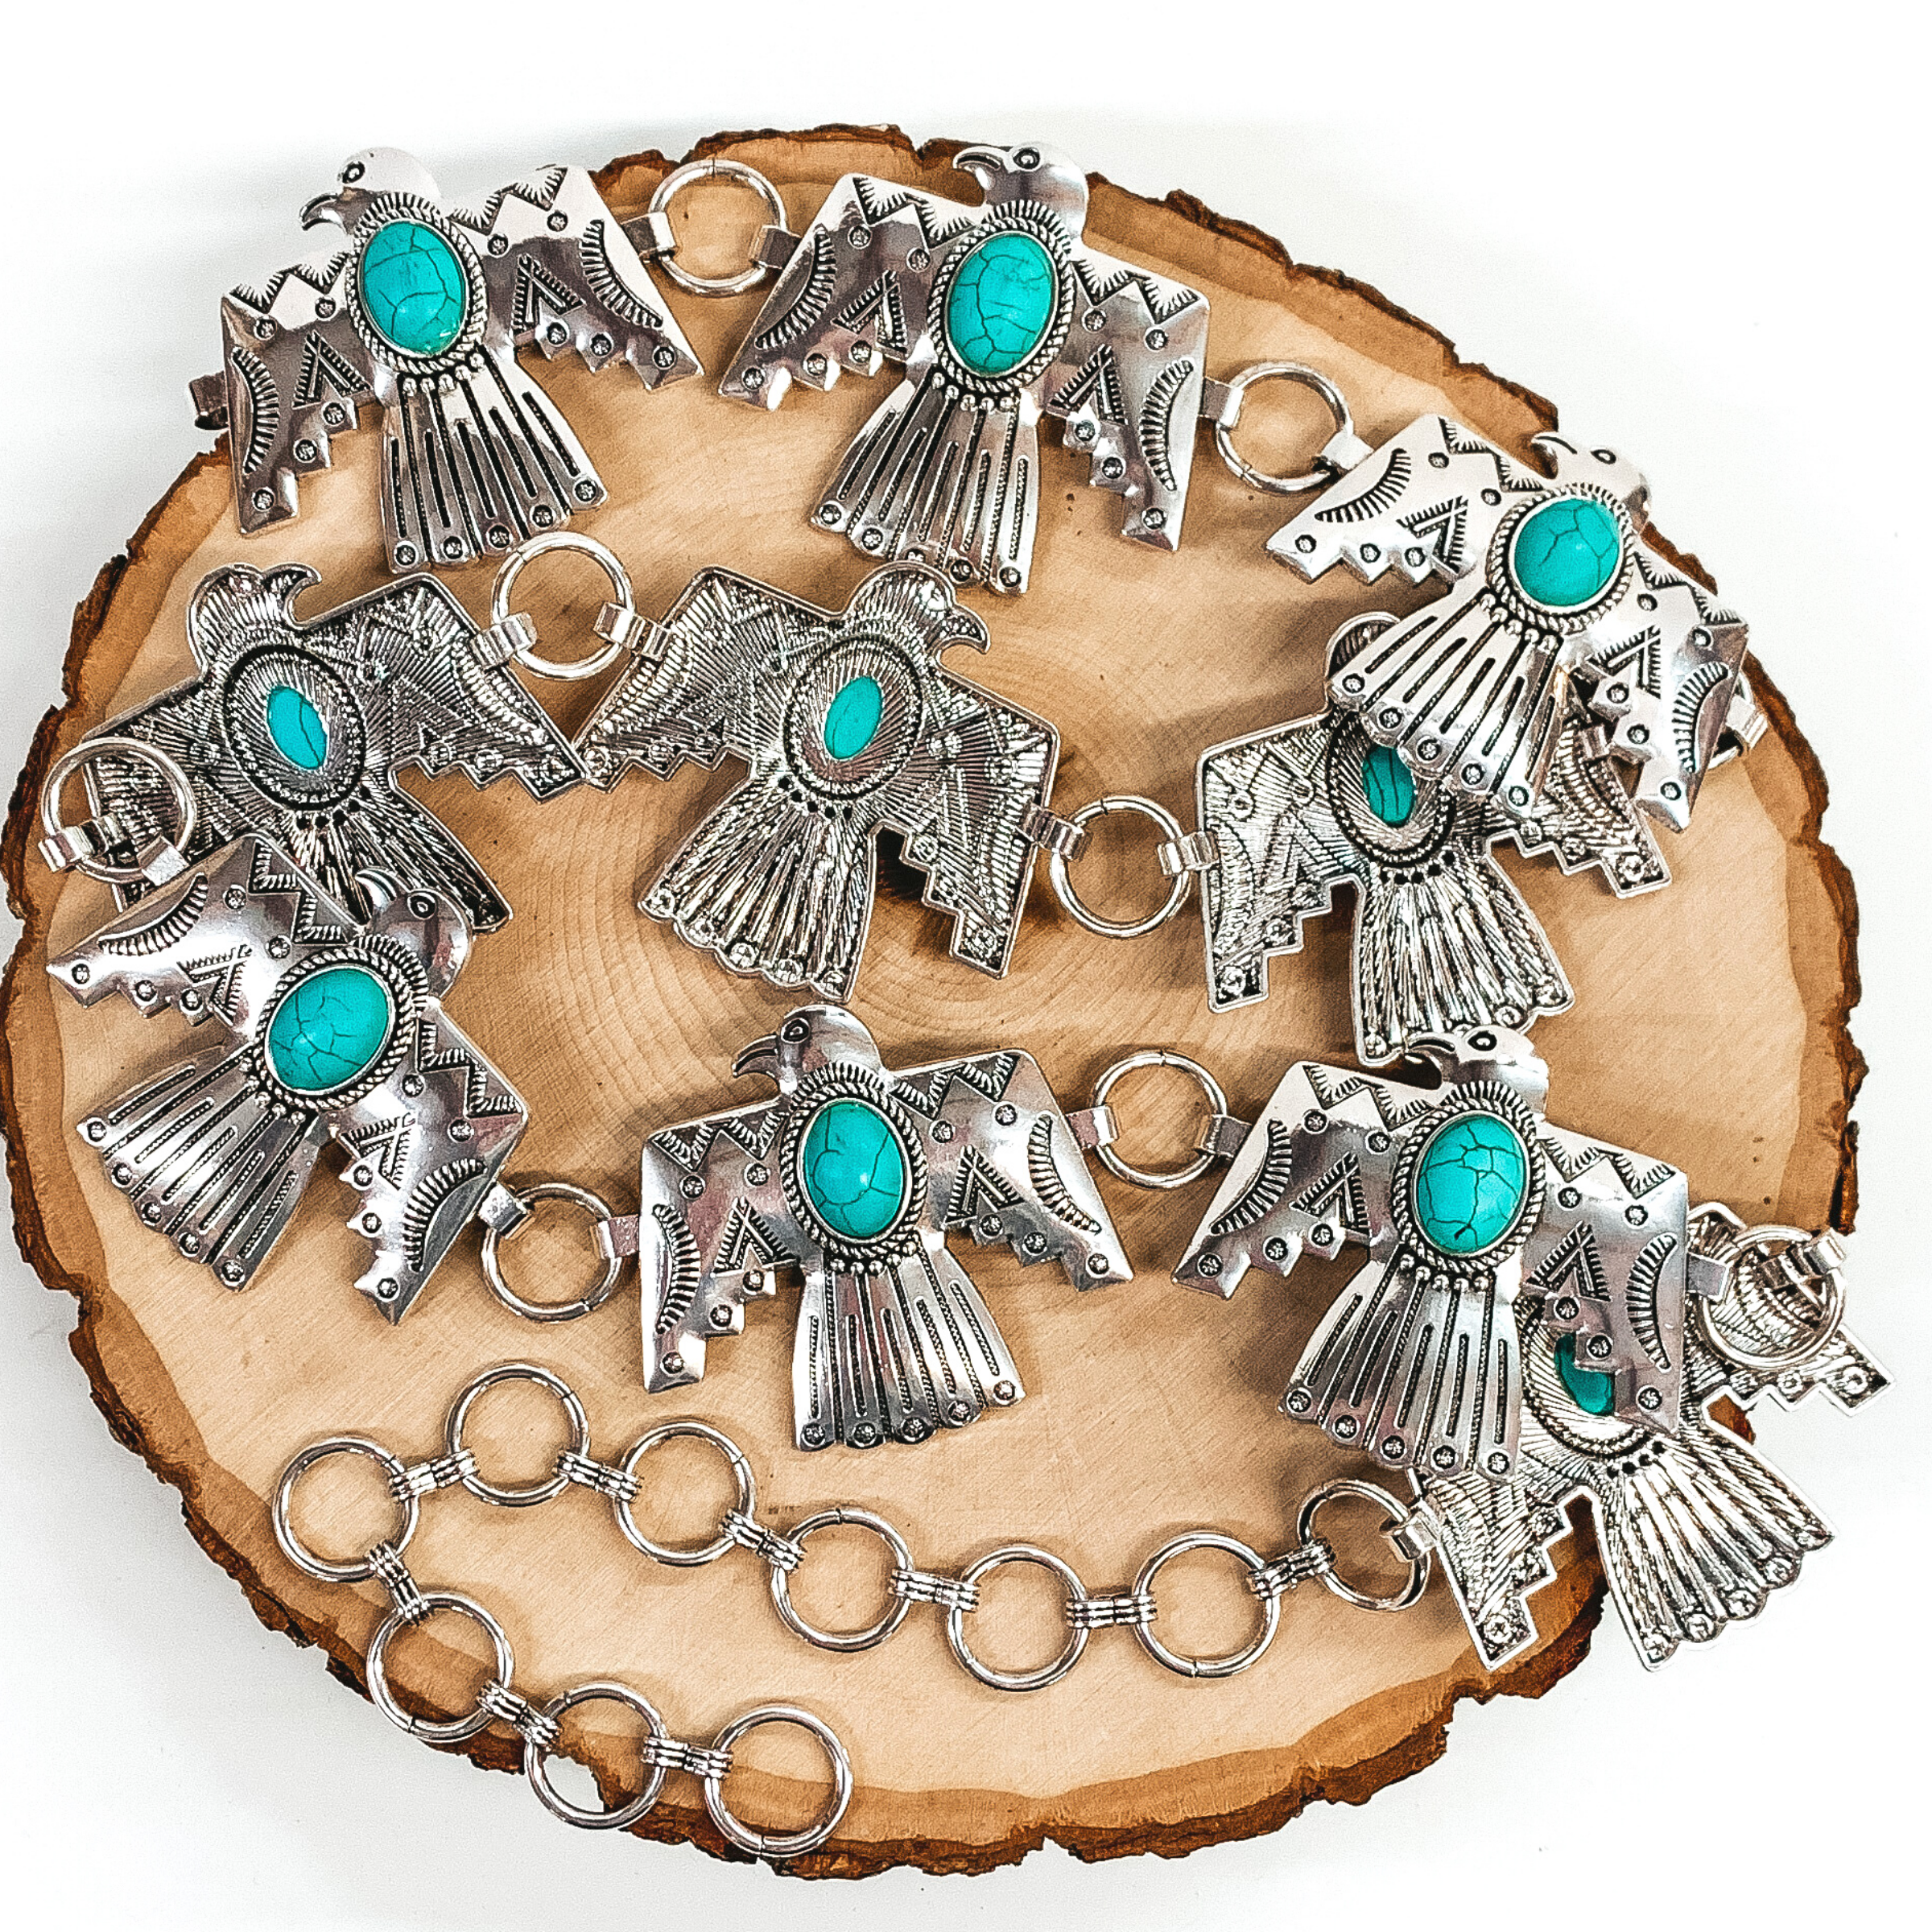 Silver thunderbird belt with center oval turquoise stones. This belt has circle loops to make it adjustable. This belt is pictured on a piece of wood on a white background. 